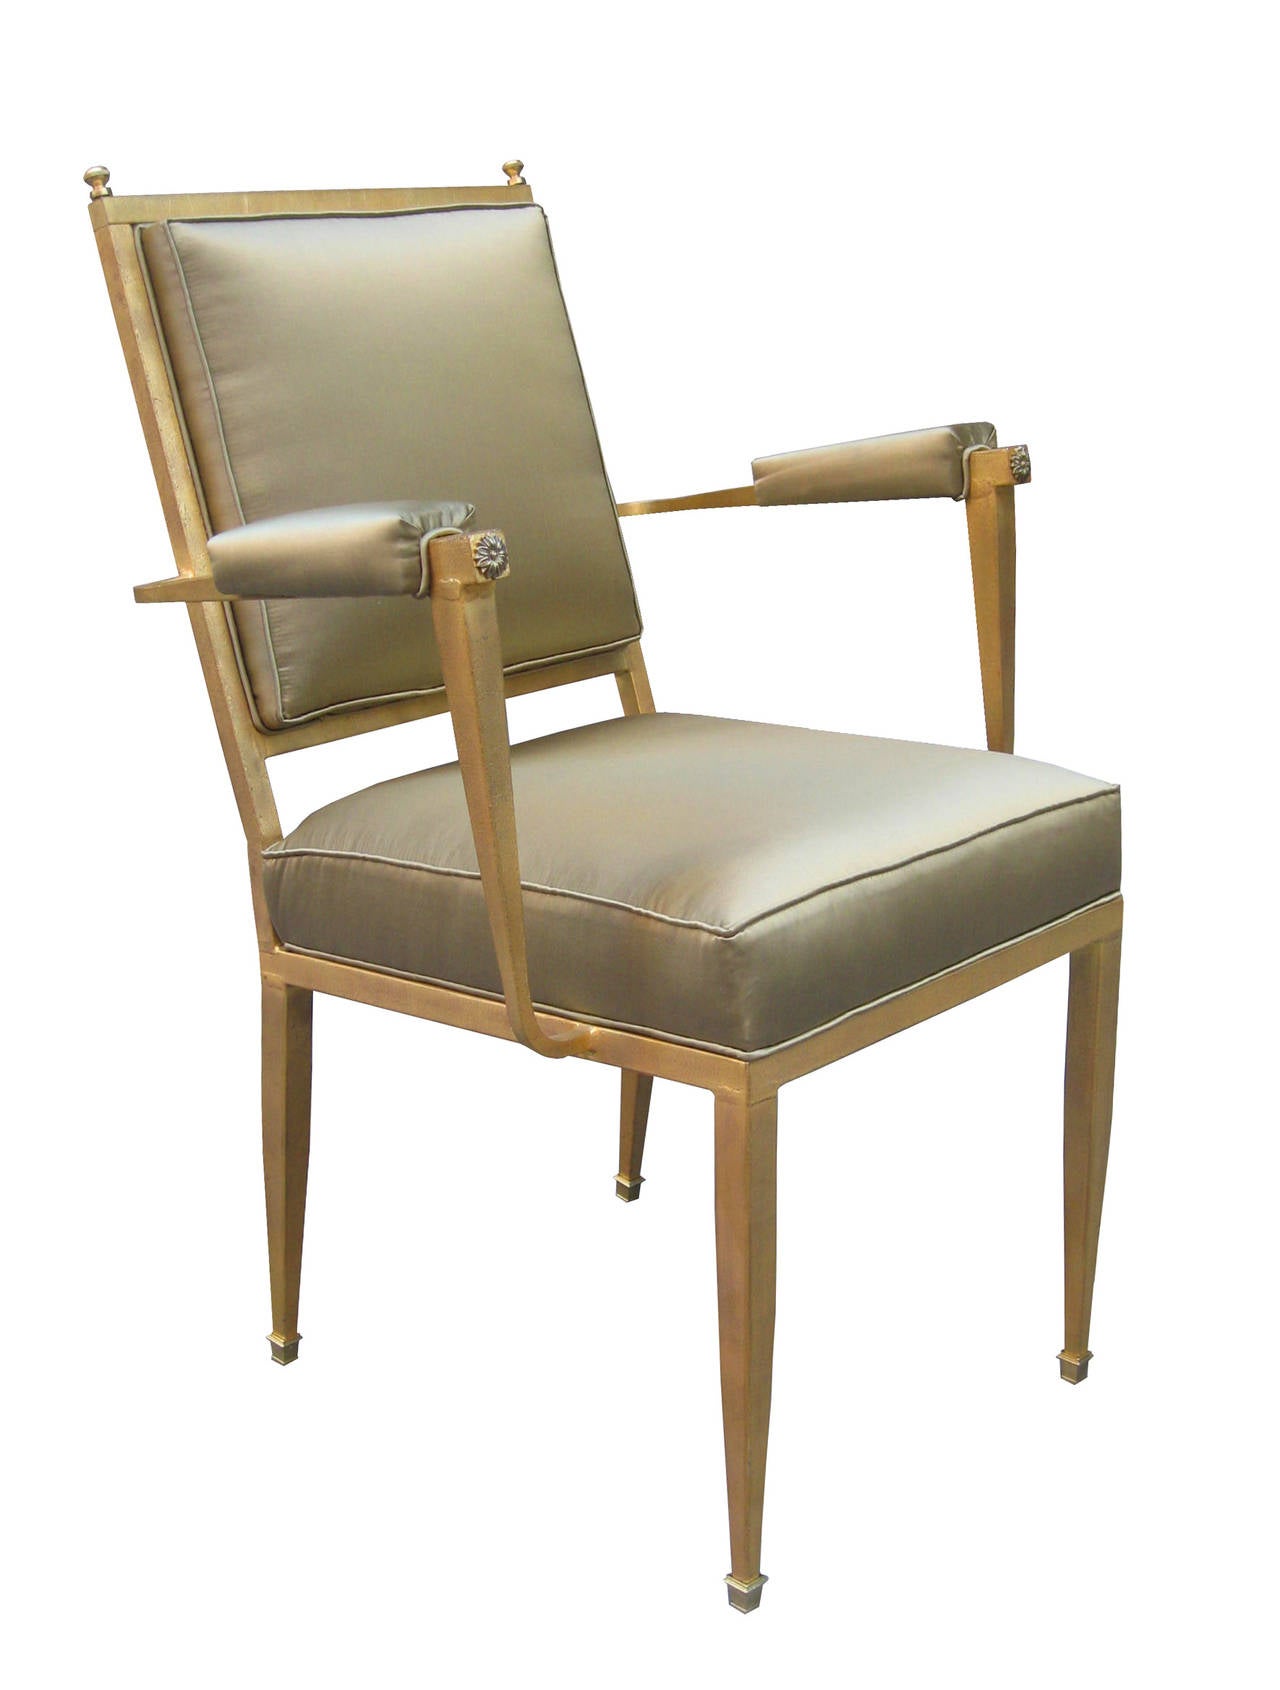 A fine pair of Art Deco armchairs.
Gold leaf craquelure-finished metal
with patinated bronze details and sabots.